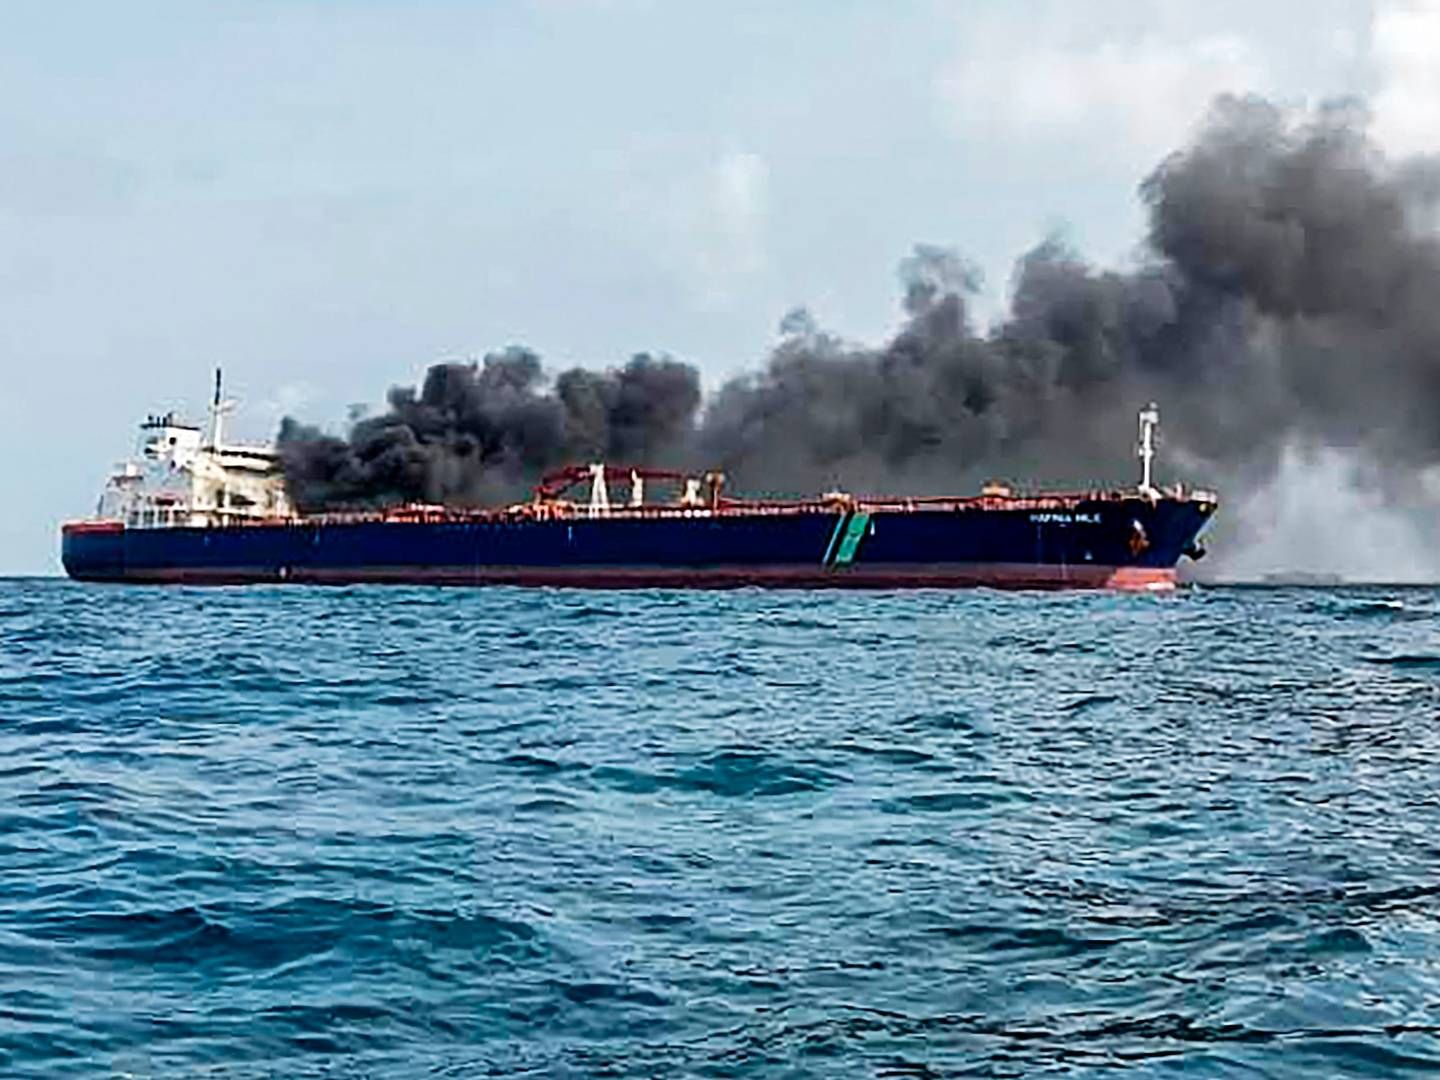 ”A salvage team that has boarded the vessel has in the meantime transferred equipment from one of the tugs present to the site to contain and stop any localized leakage,” Hafnia wrote in a statement to ShippingWatch,” Hafnia writes ina message to ShippingWatch.